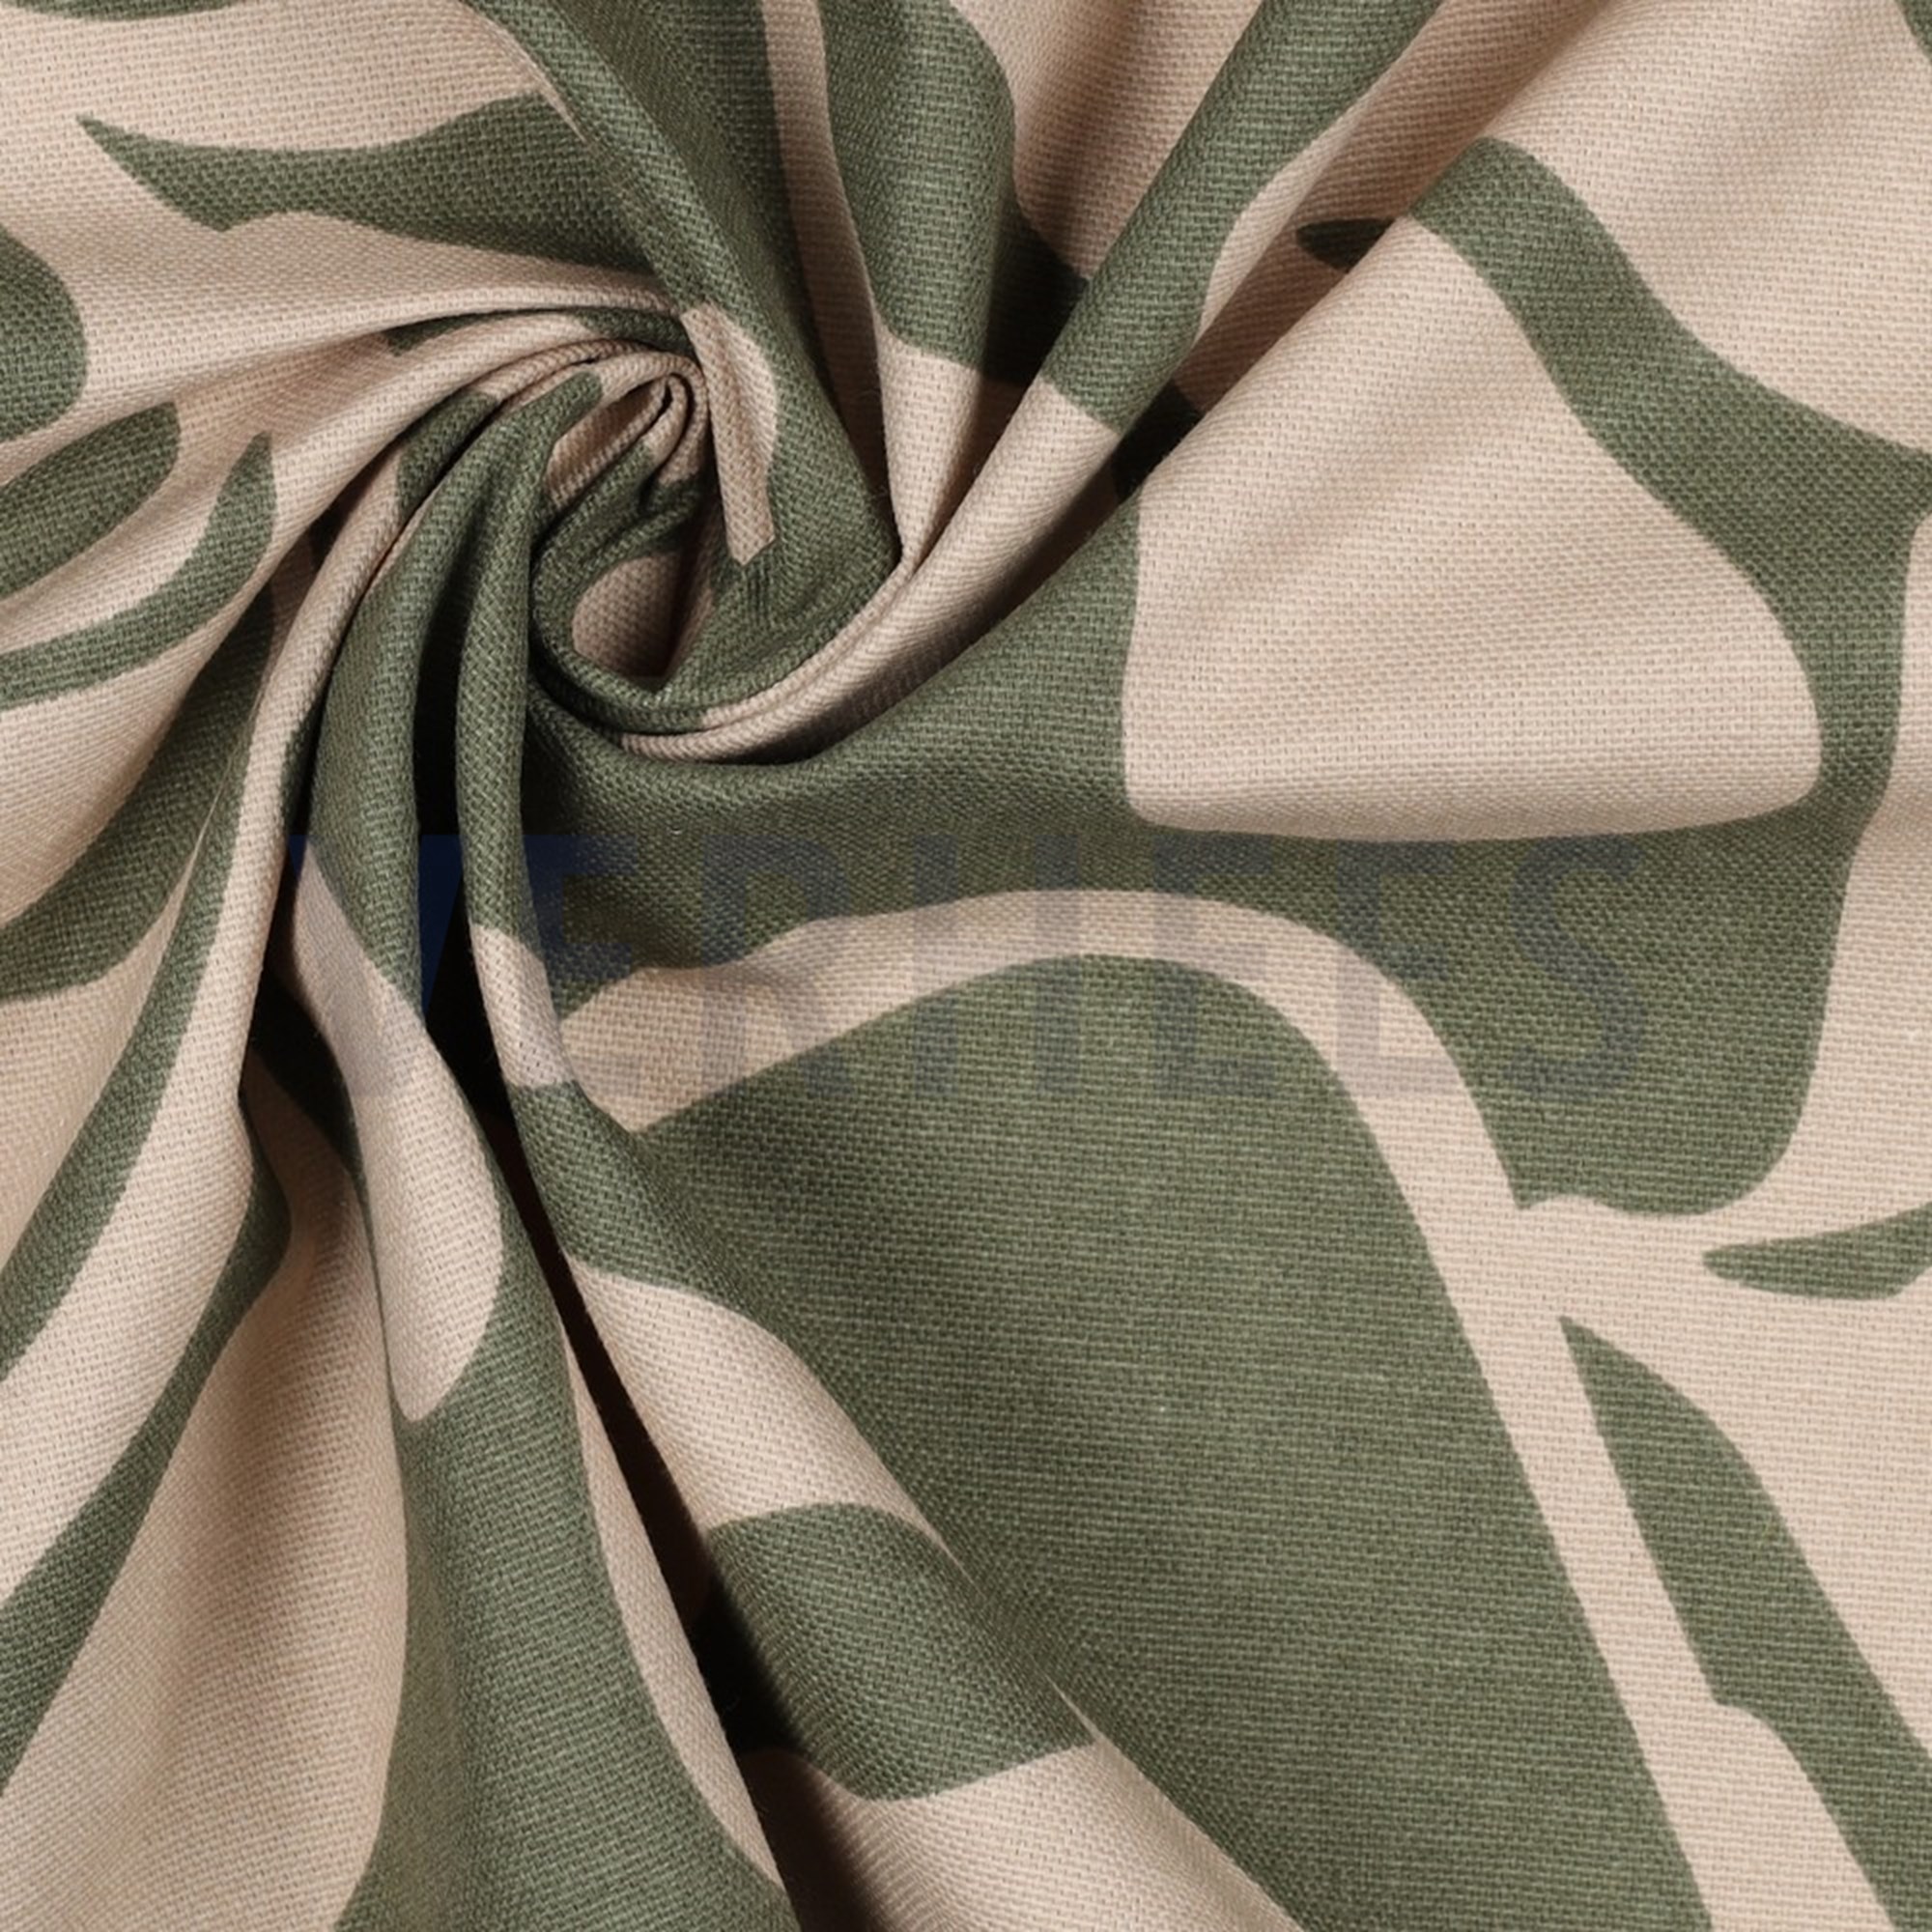 CANVAS VINTAGE LEAVES ARMY GREEN (high resolution) #3